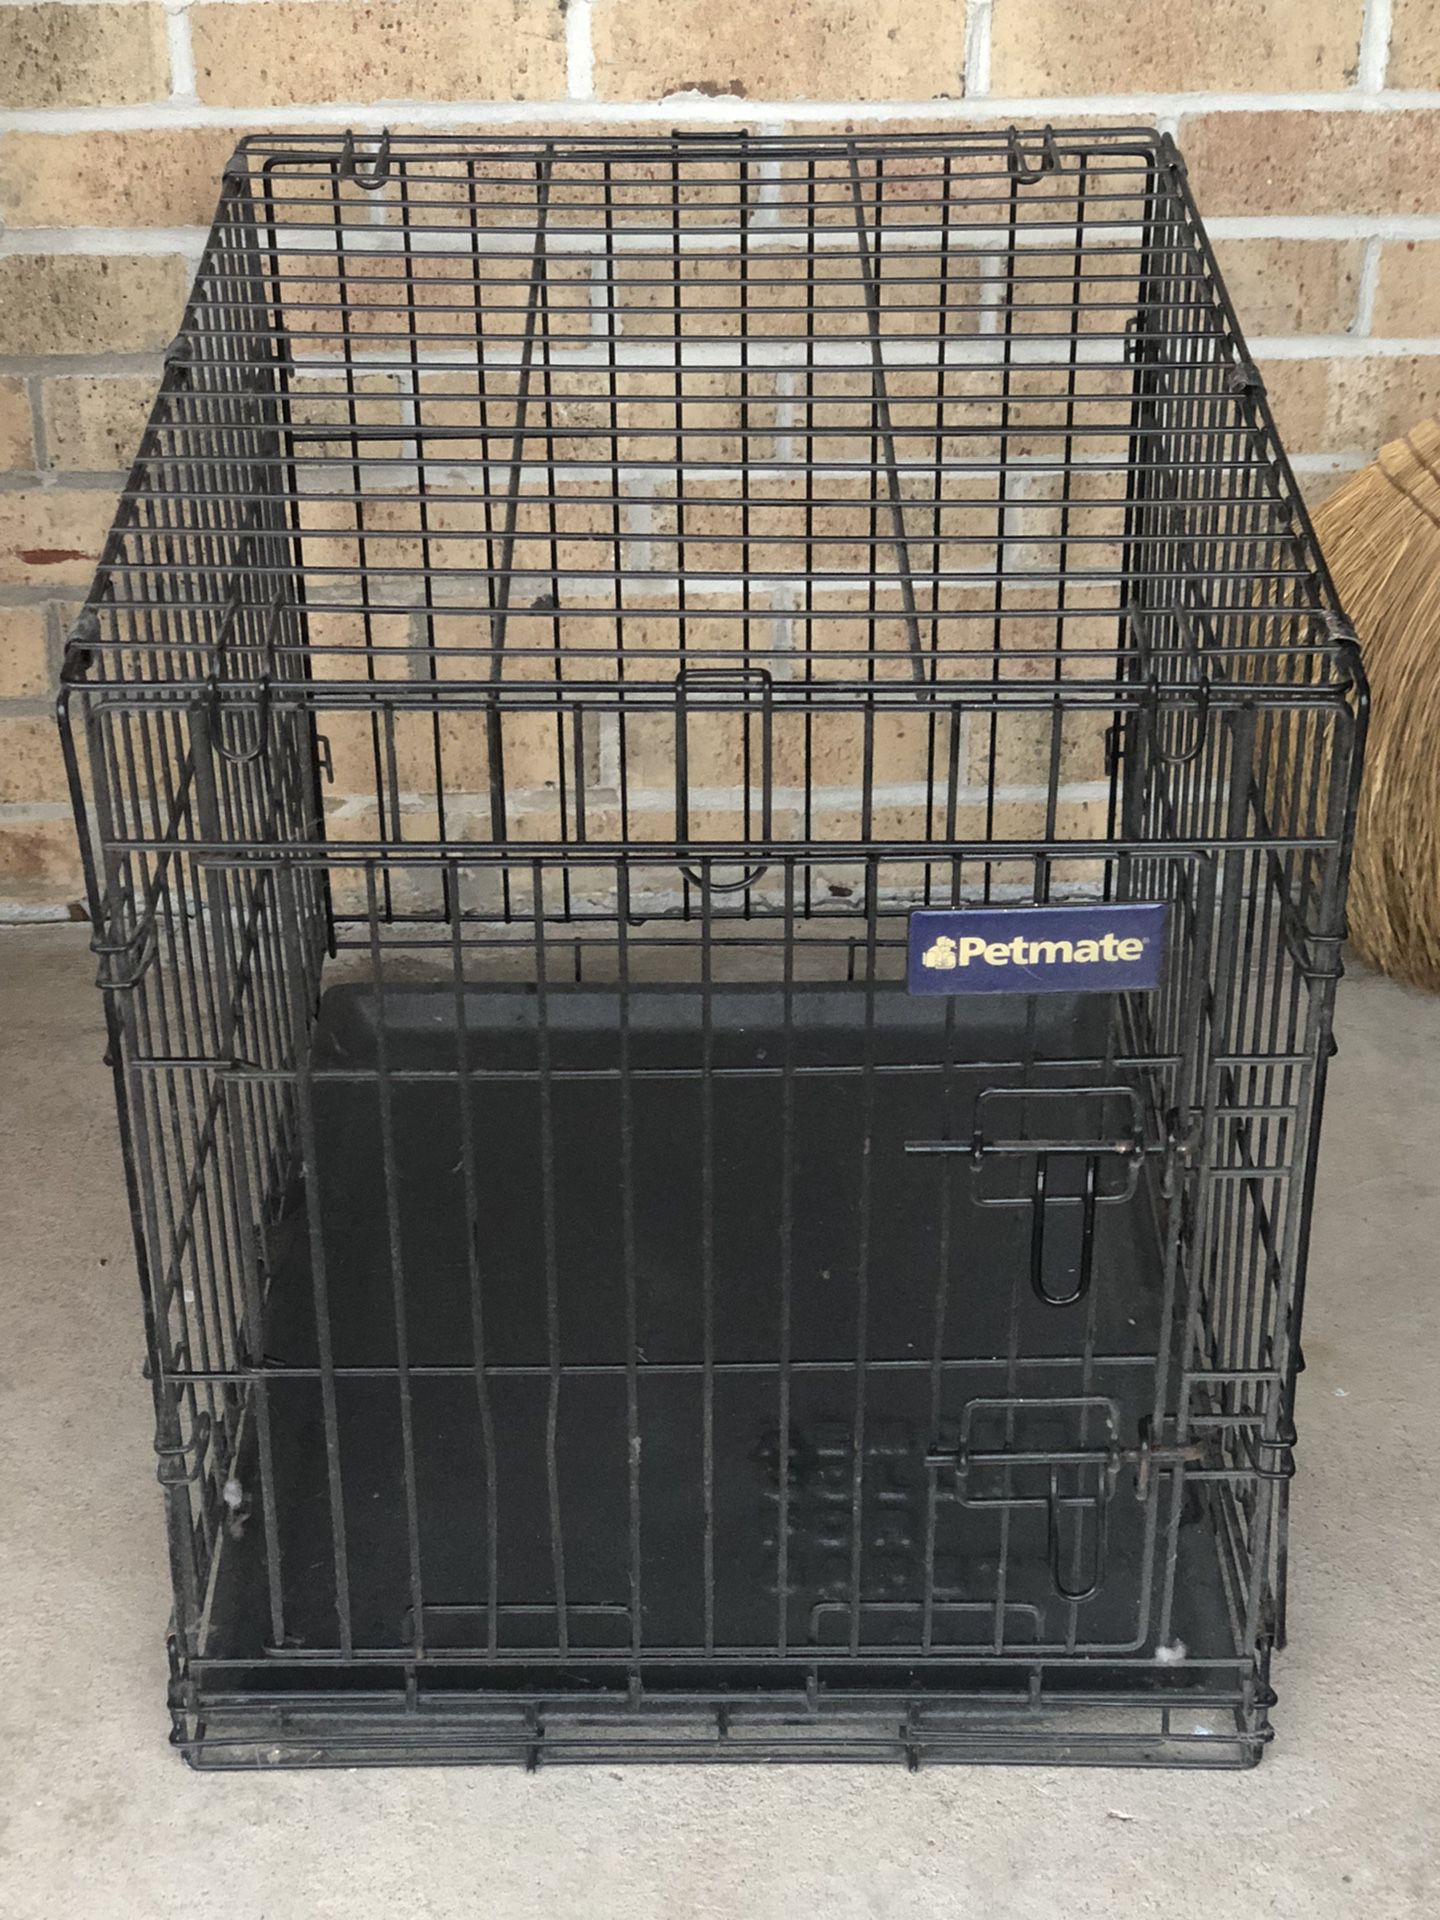 Petmate Small Dog Kennel Or Crate Perfect For A Puppy Or Small Dog